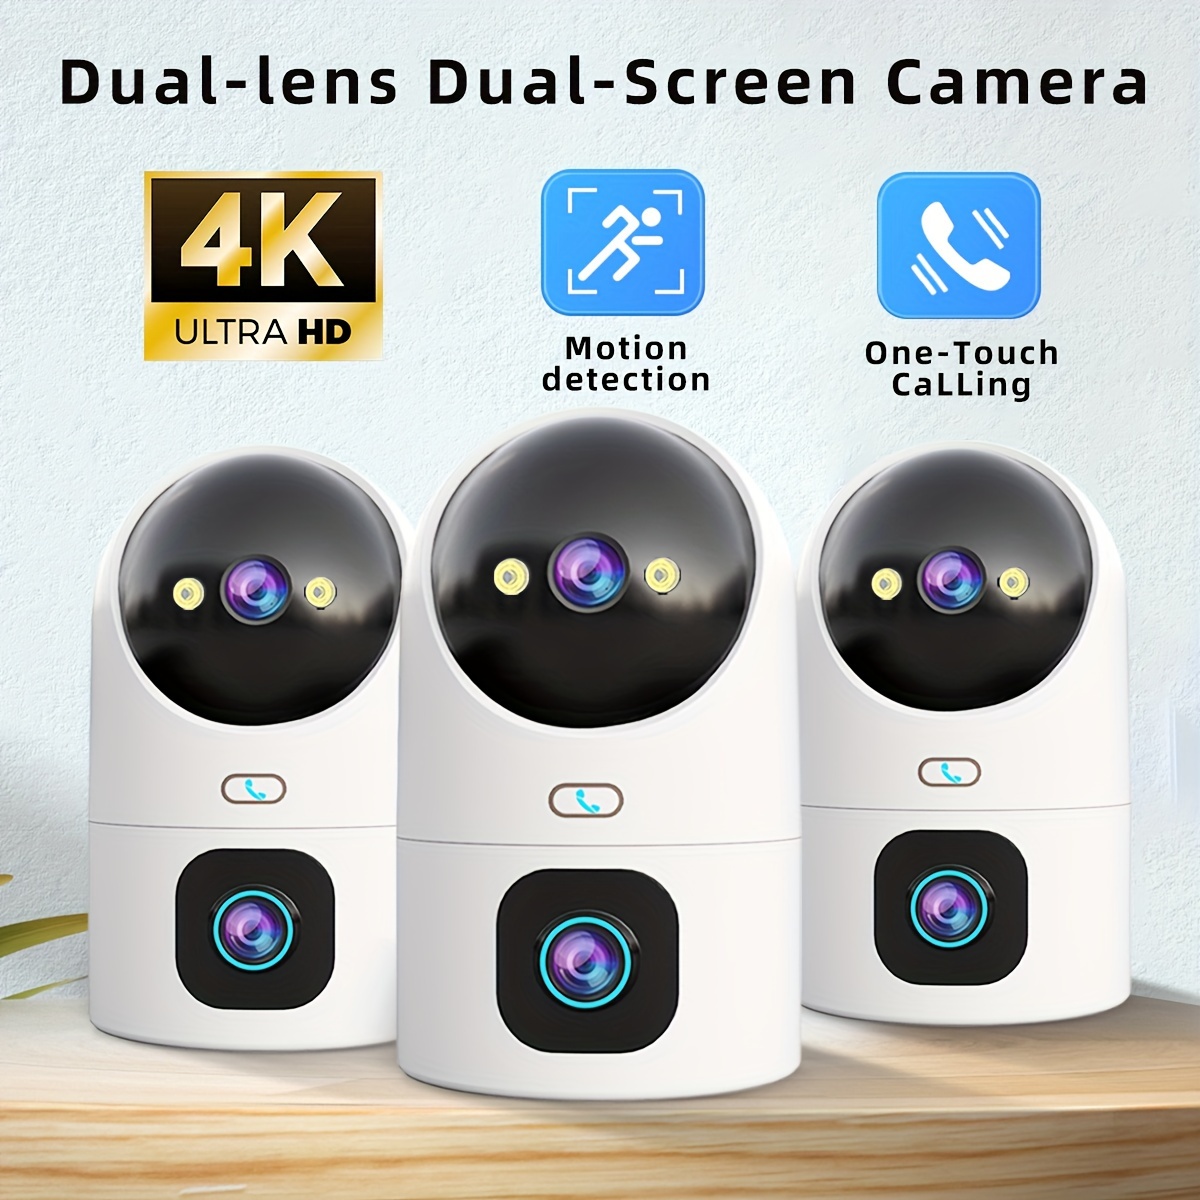 

3pcs 4k Fhd Ptz Wireless Ip Camera 5g Wifi Dual Lens Dual Screen Camera Automatic Tracking Baby Care Day And Night Full Color Sound And Light Alert Voice Warning Monitor Street Security Camera